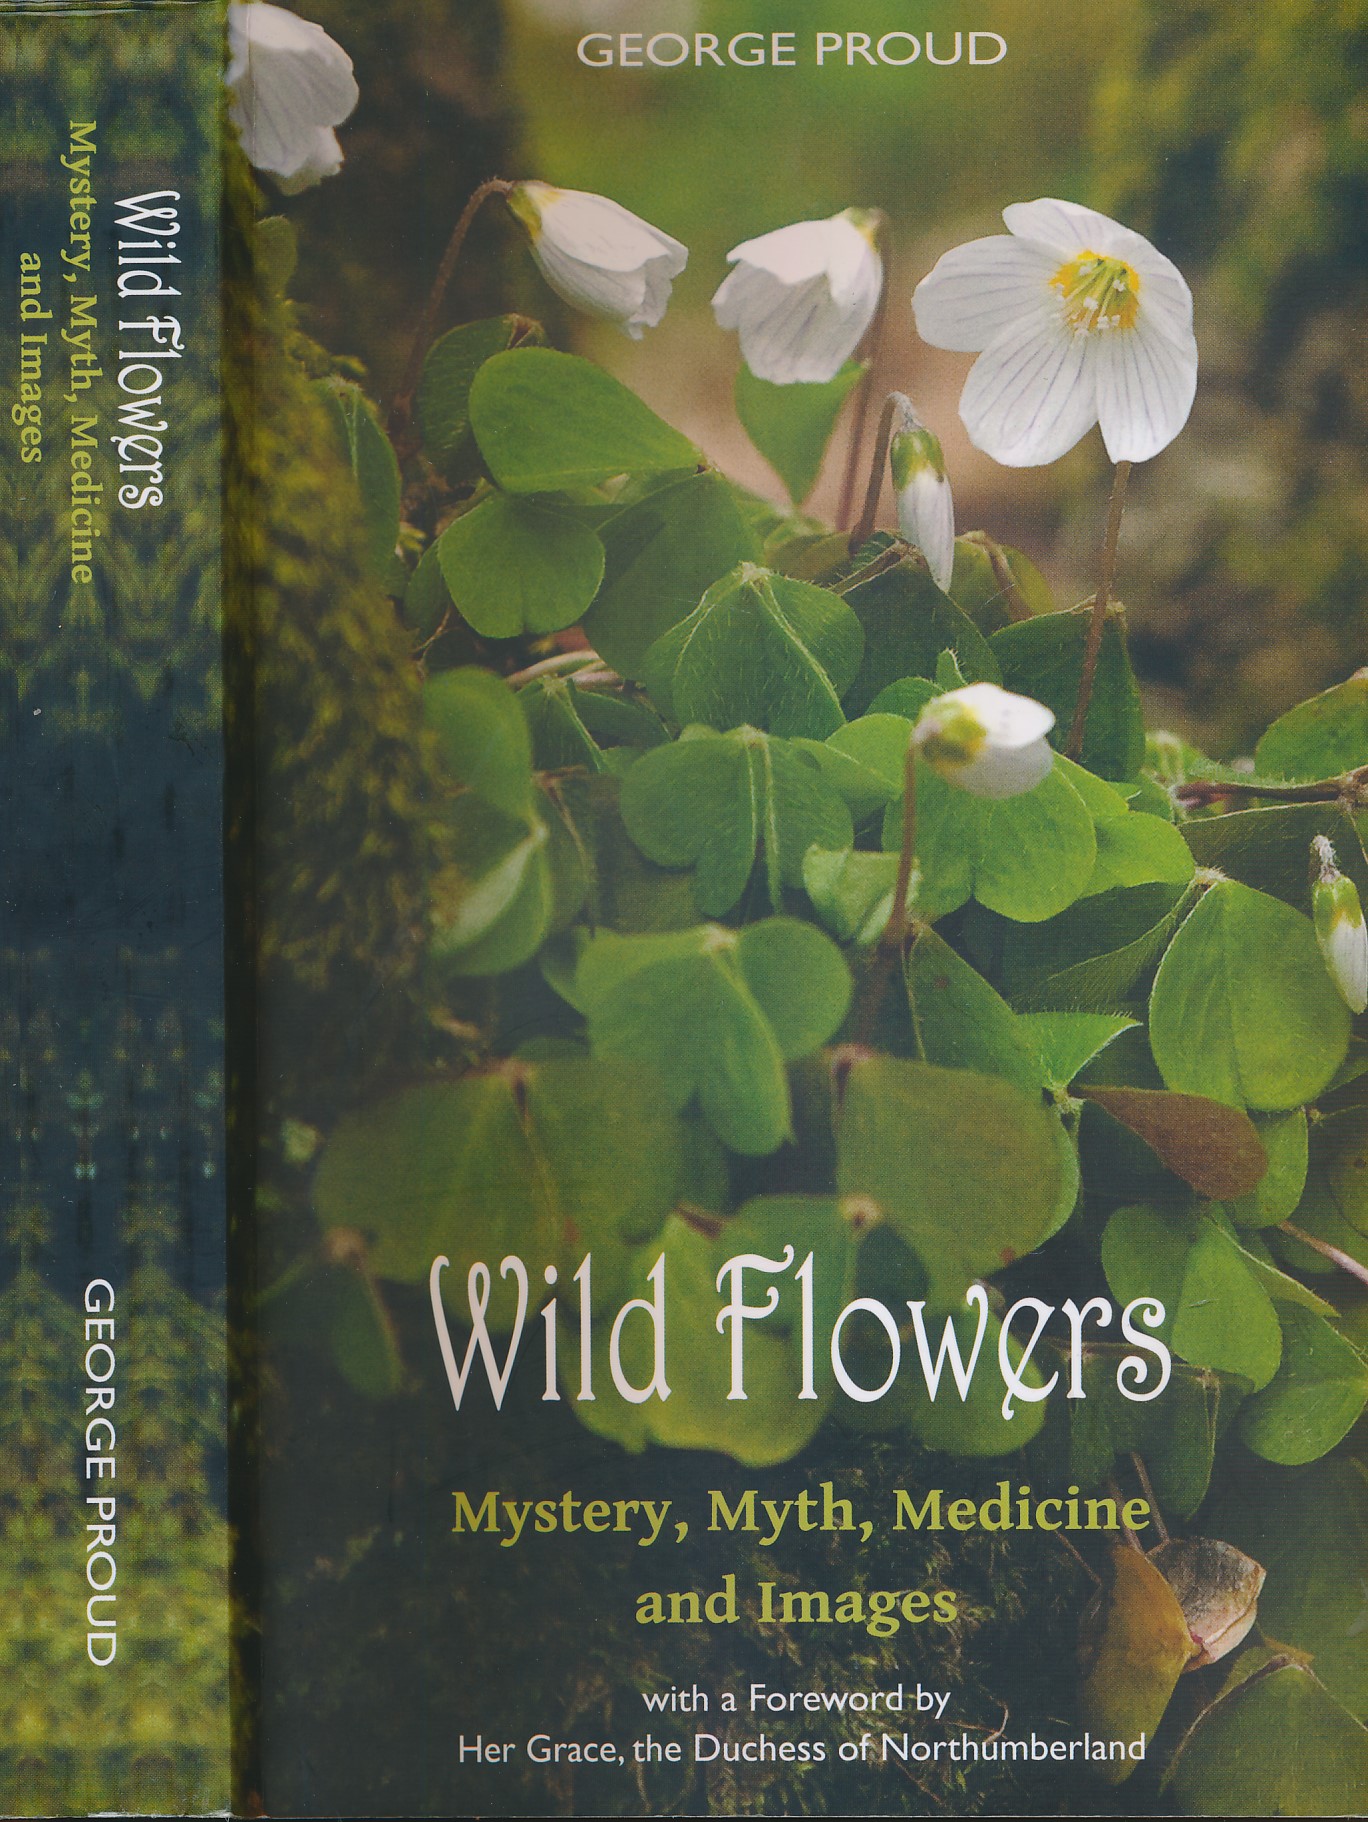 Wild Flowers. Mystery, Myth, Medicine and Images. Signed copy